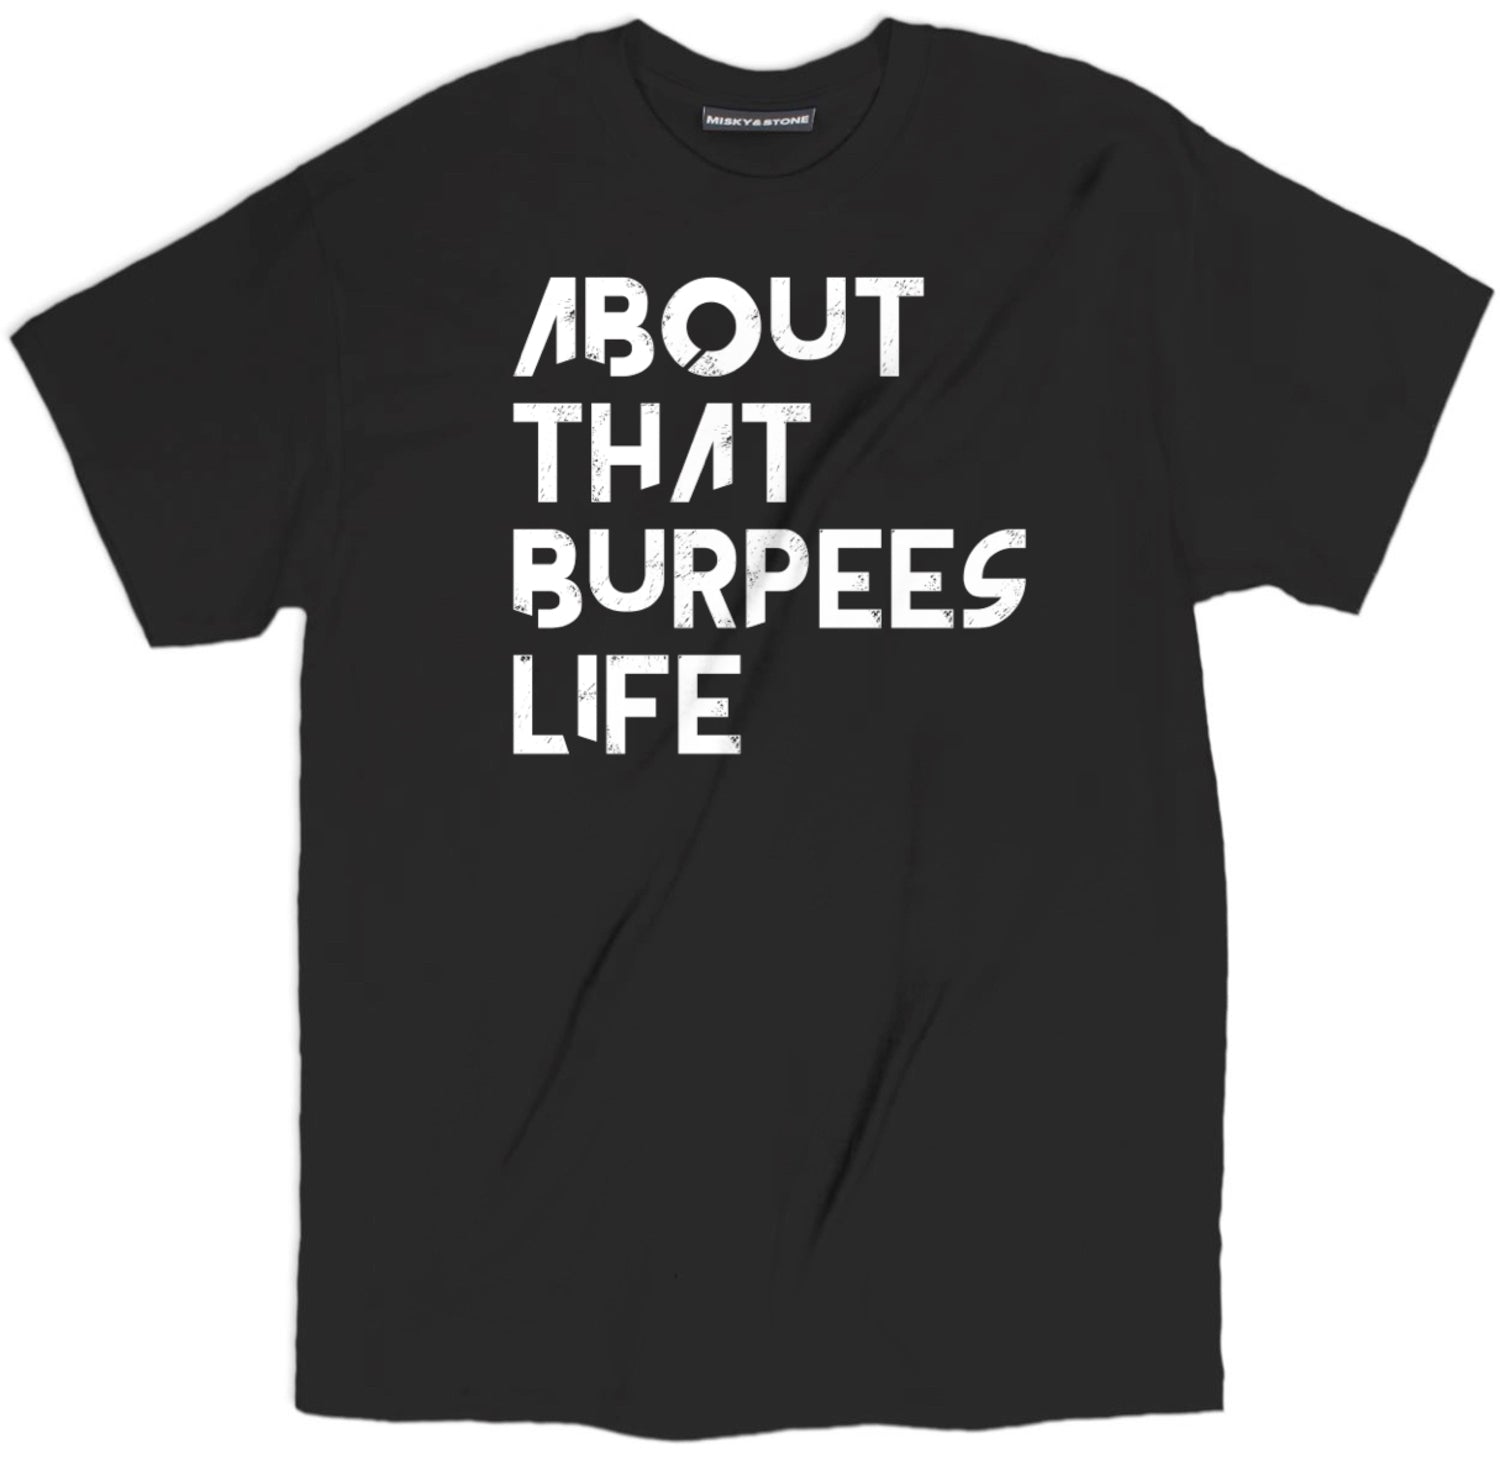 About That Burpees Life T Shirt